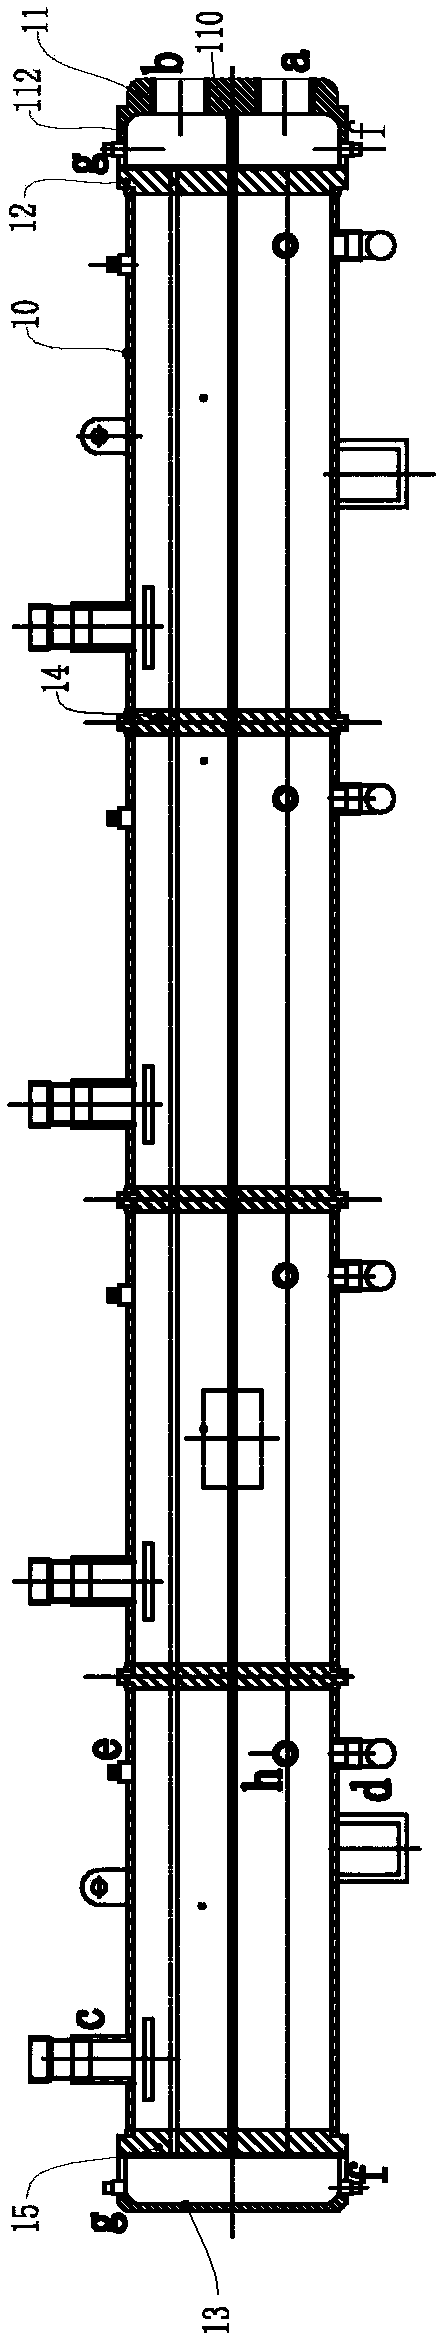 Multi-section shell and copper pipe shared single-spacing-board refrigeration evaporator